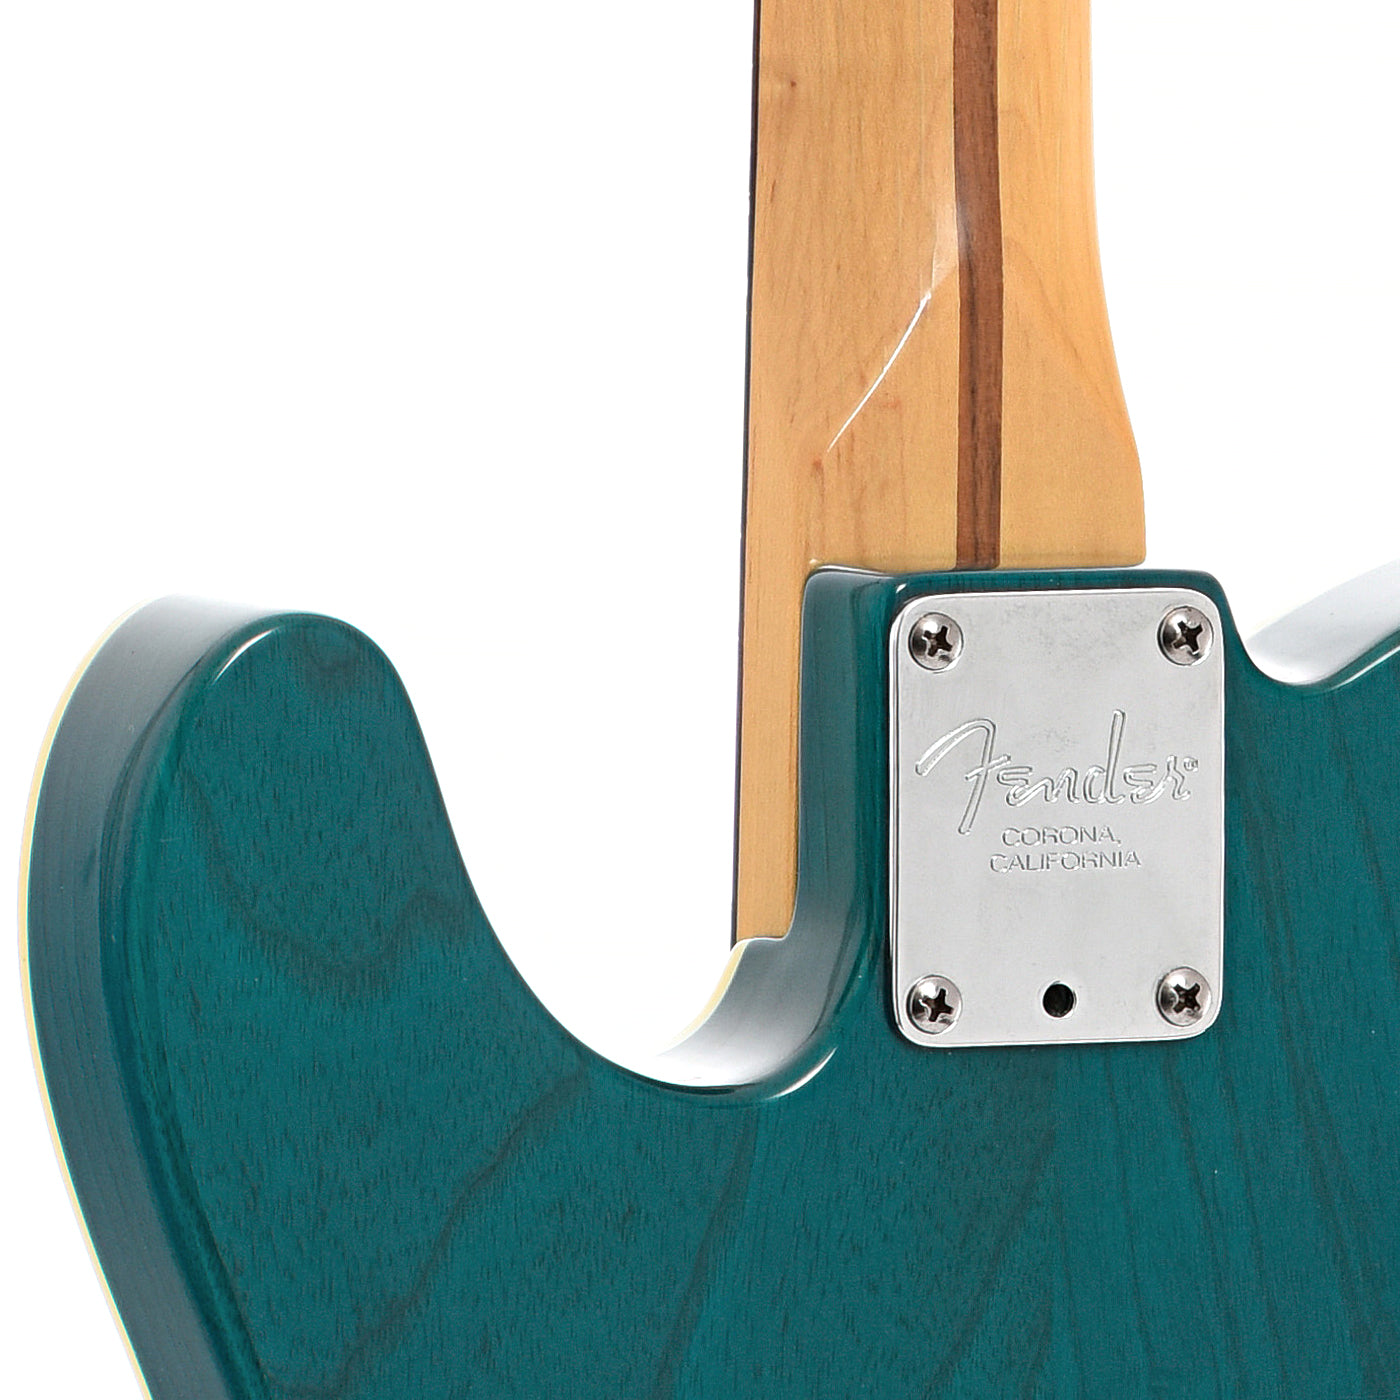 Neck joint of Fender American Deluxe Telecaster (1999)